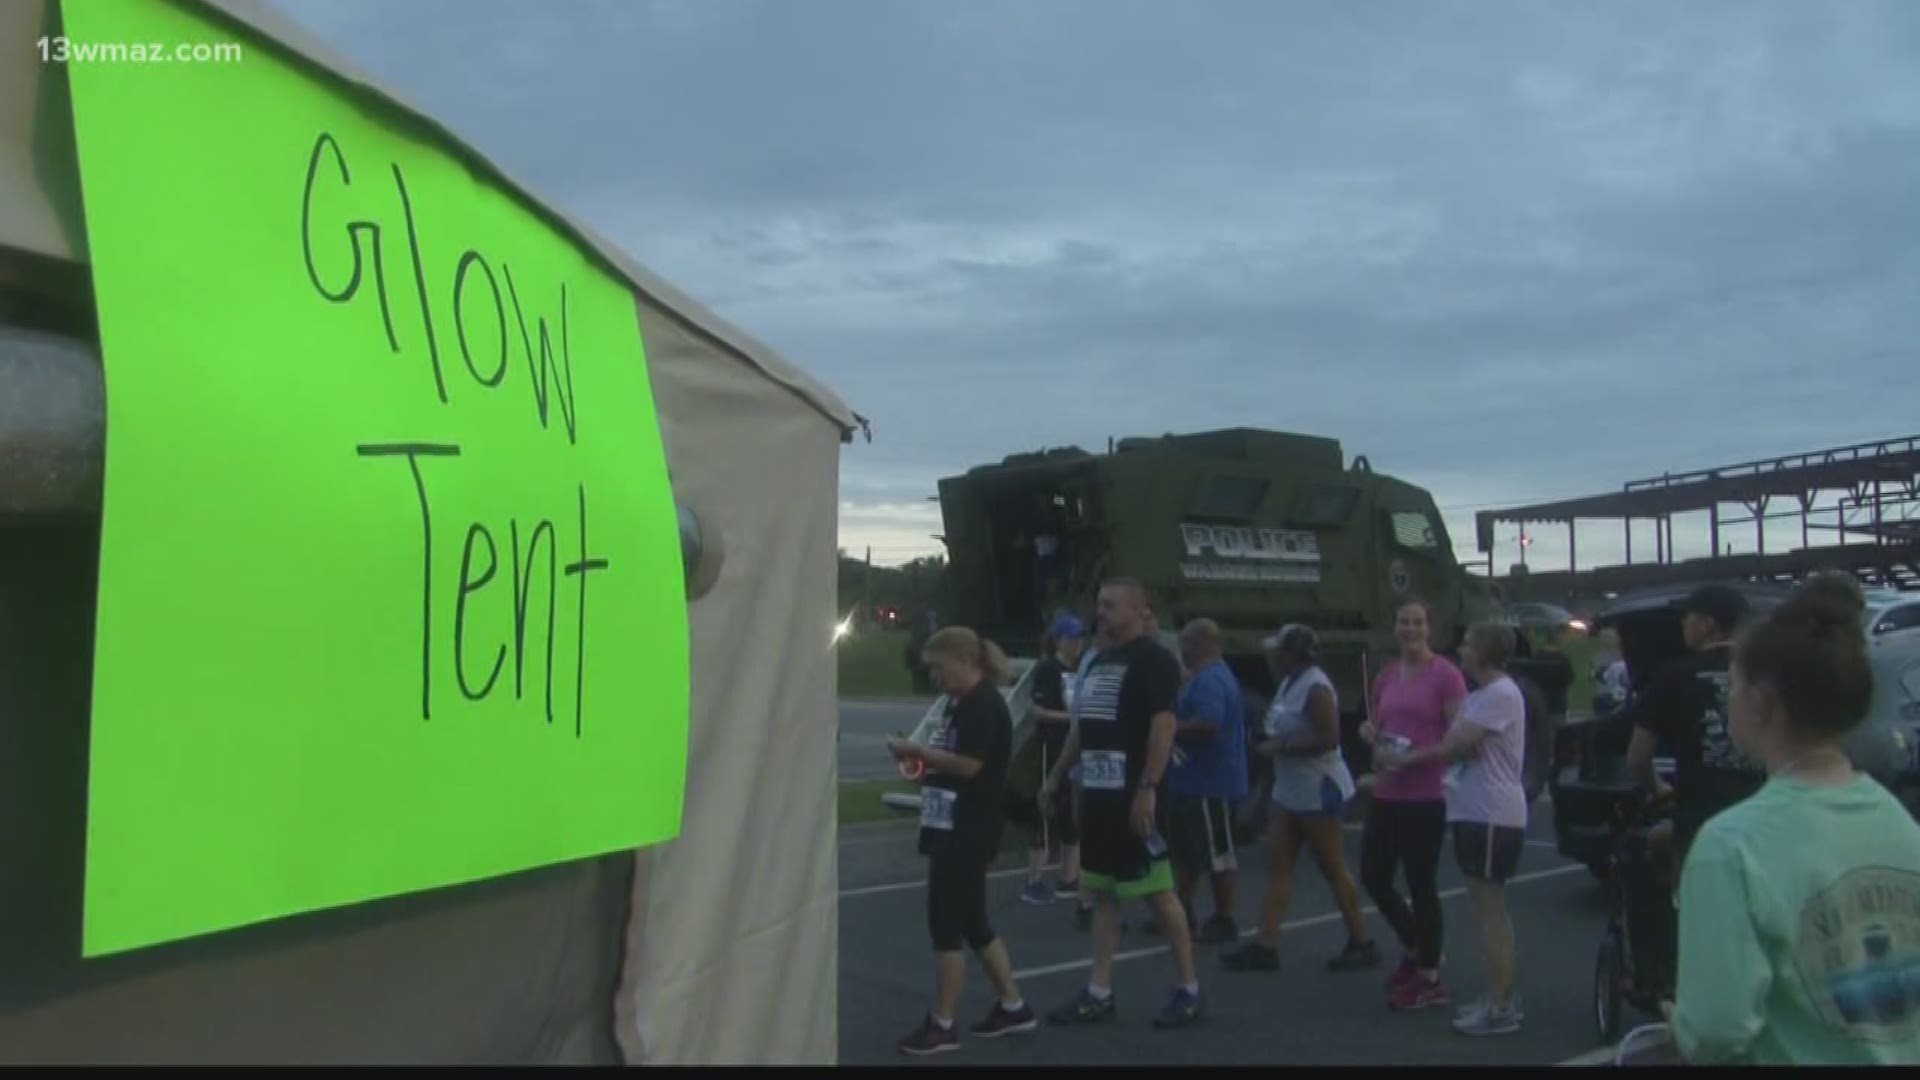 800 runners decked in glow sticks and neon clothing kicked off 2019's Police Week with a Back  the Blue Glow Run in Warner Robins on Saturday. All money raised went to the Warner Robins Police Auxiliary.